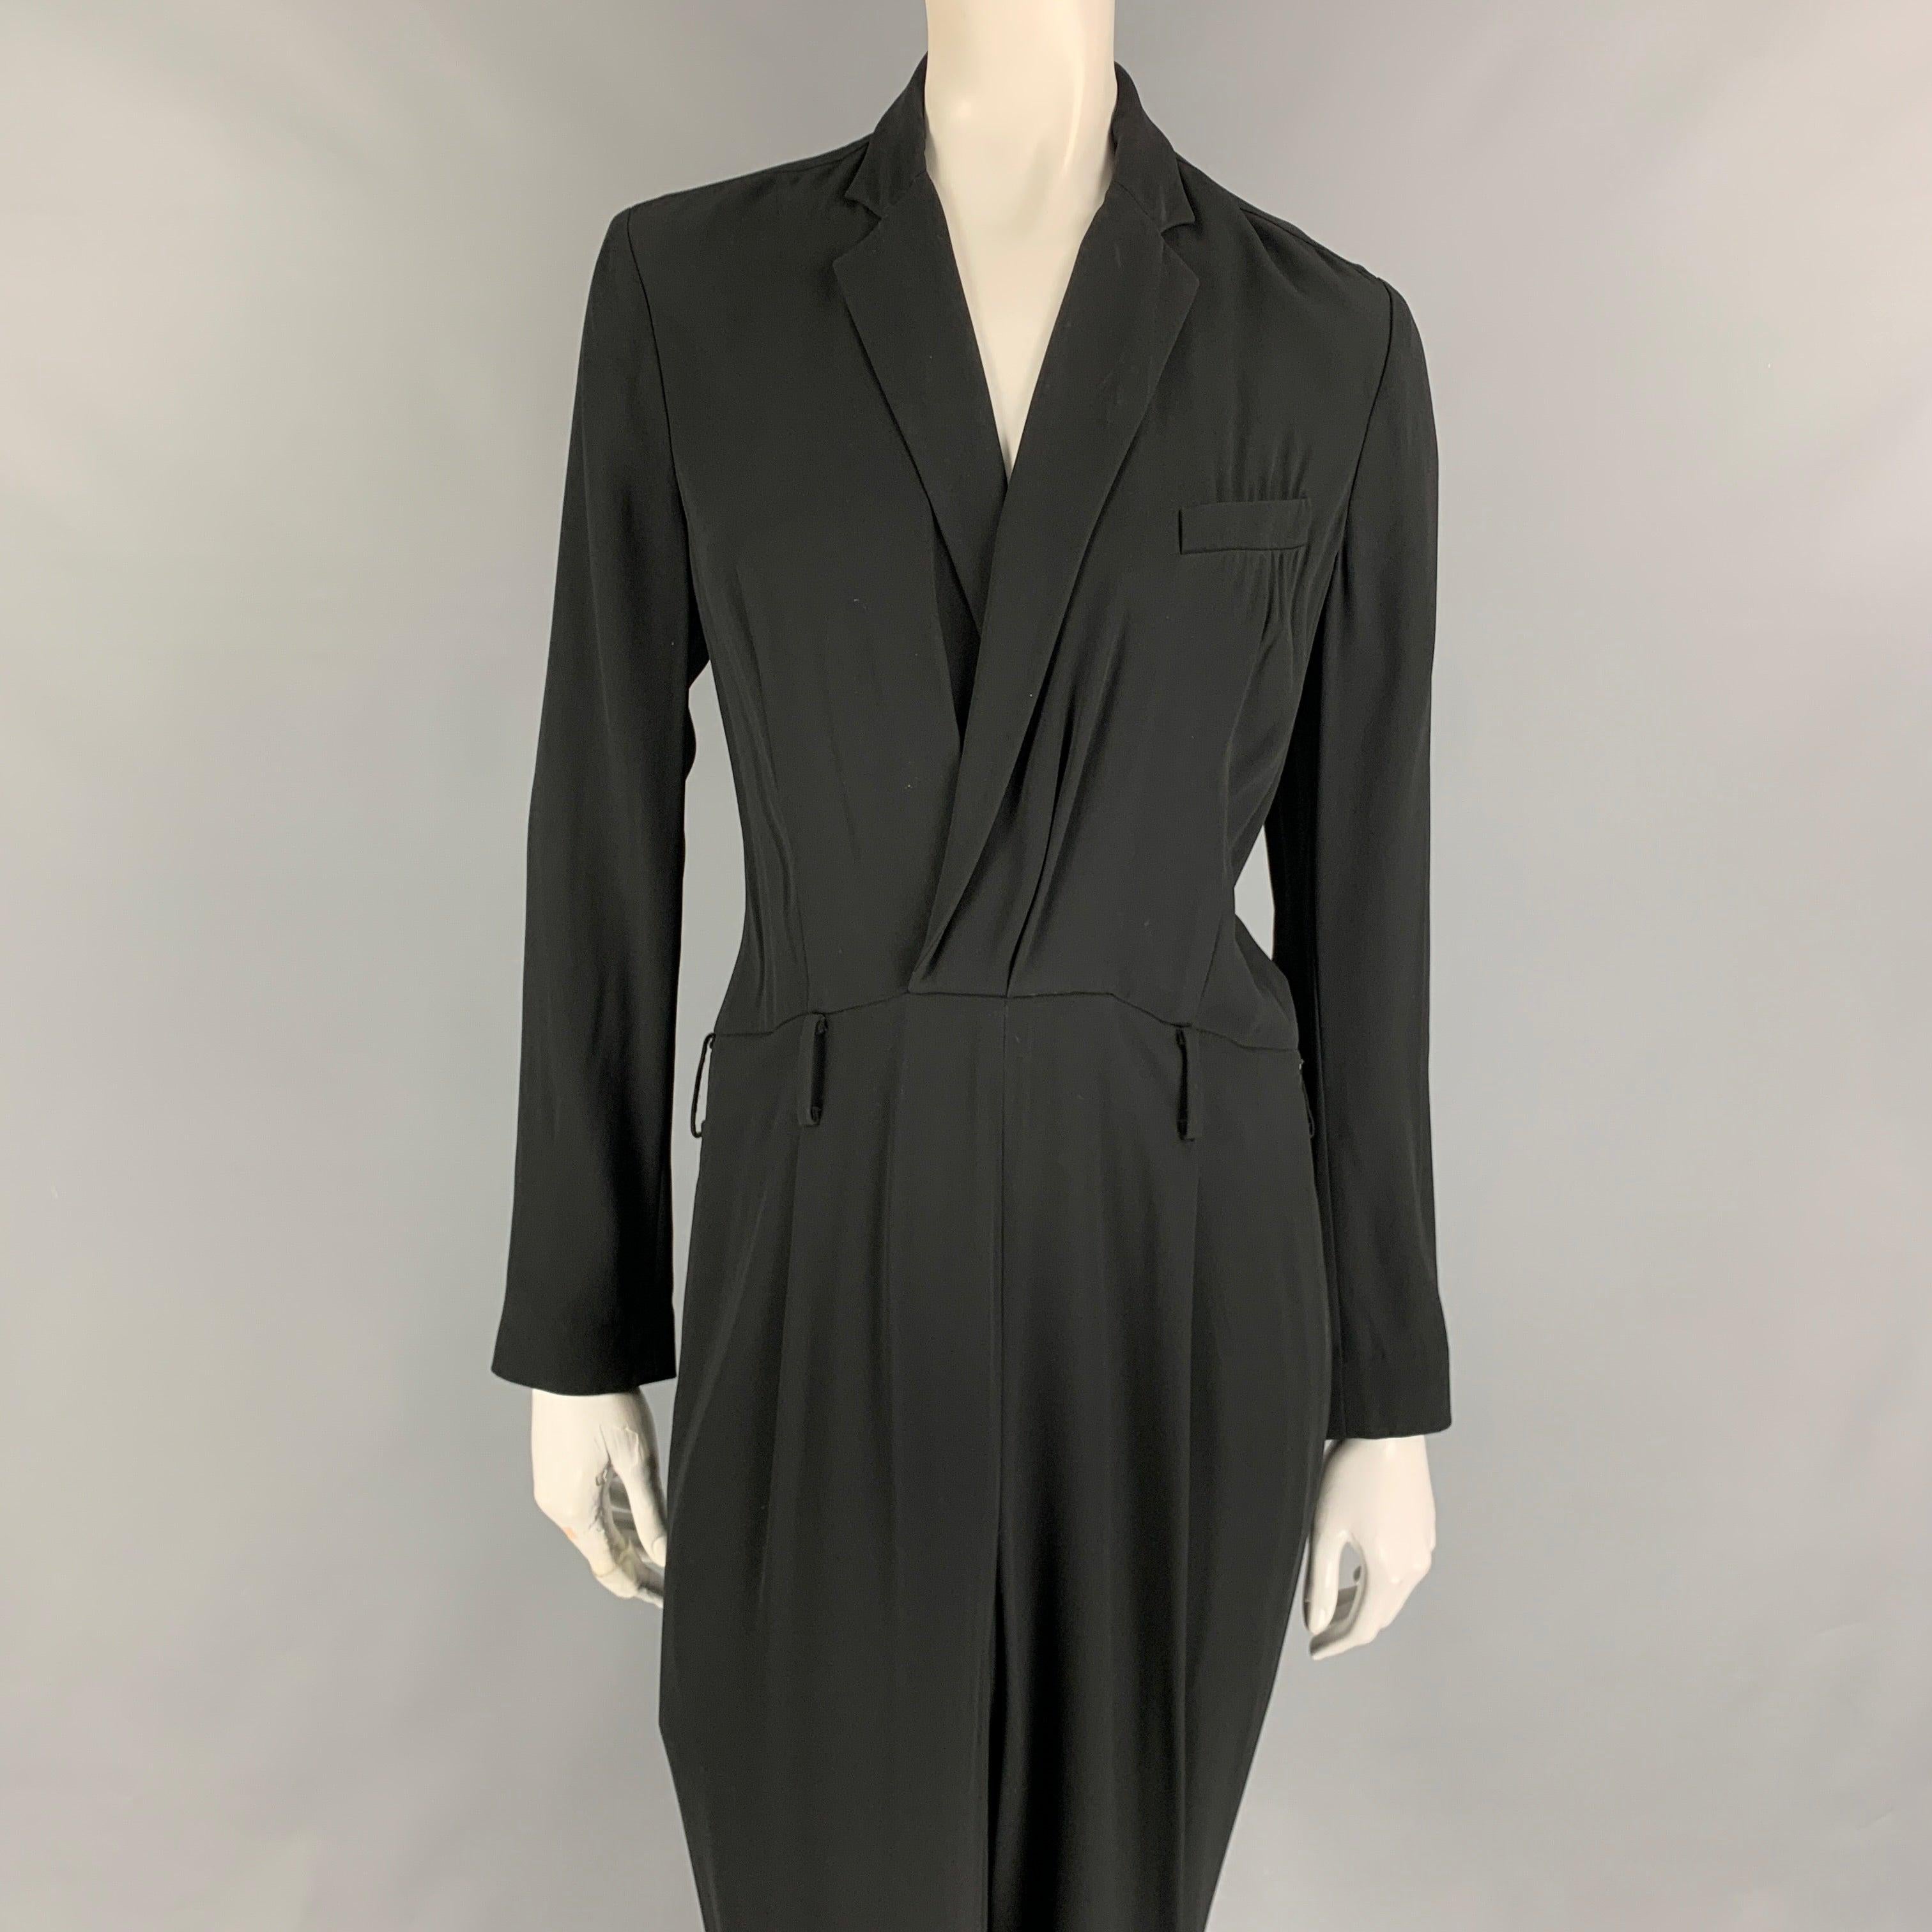 RALPH LAUREN Collection jumpsuit comes in a black viscose / acetate featuring a notch lapel, loose fit, long sleeves, and a side zipper closure. Made in USA.
Very Good
Pre-Owned Condition. 

Marked:   8 

Measurements: 
 
Shoulder: 16 inches  Bust: